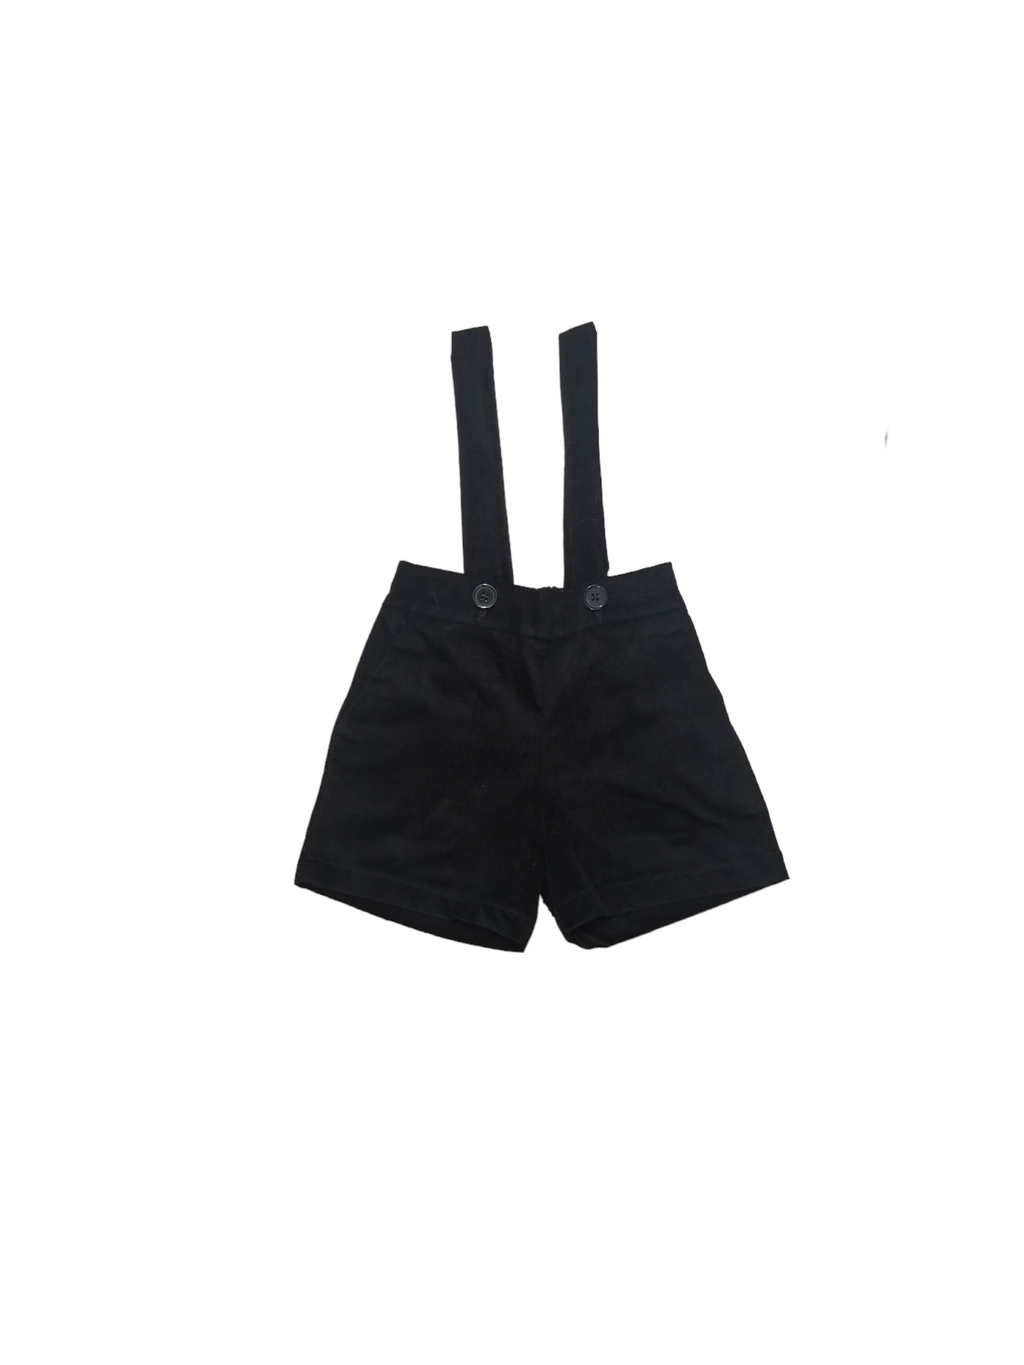 Pernille Clement Shorts With Suspenders - Black